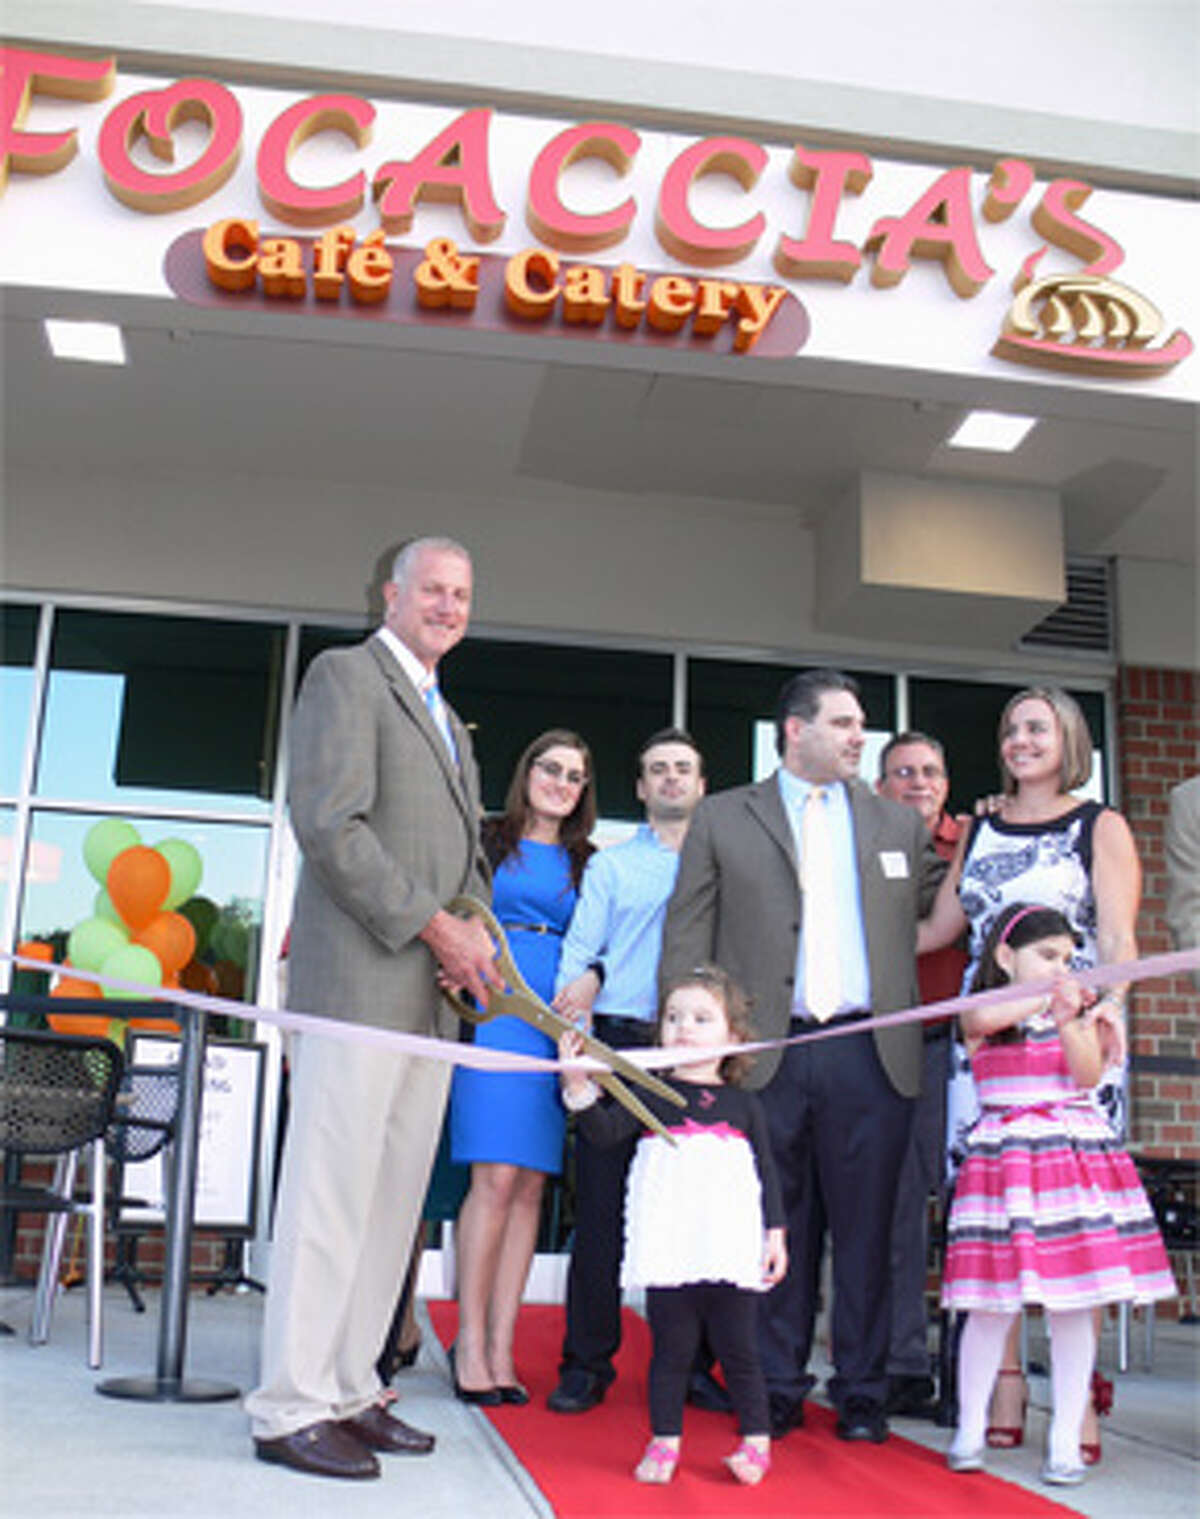 Mayor Mark Lauretti joins the owners and their families to cut the ribbon at the grand opening.